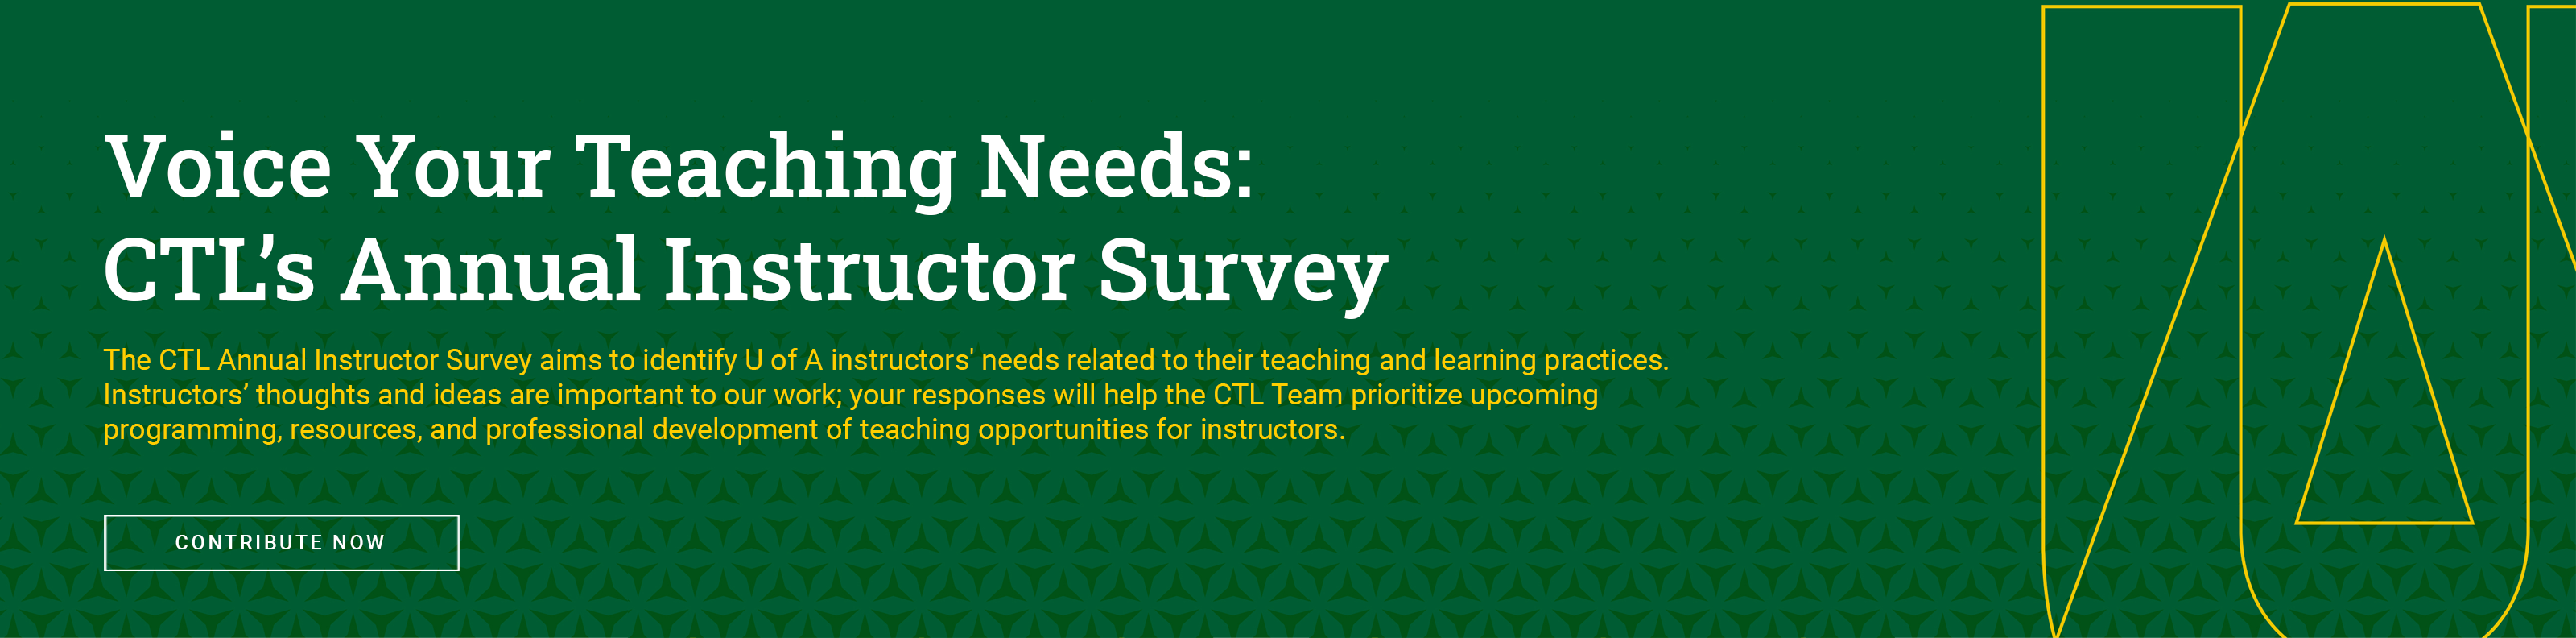 Voice Your Teaching Needs: CTL’s Annual Instructor Survey